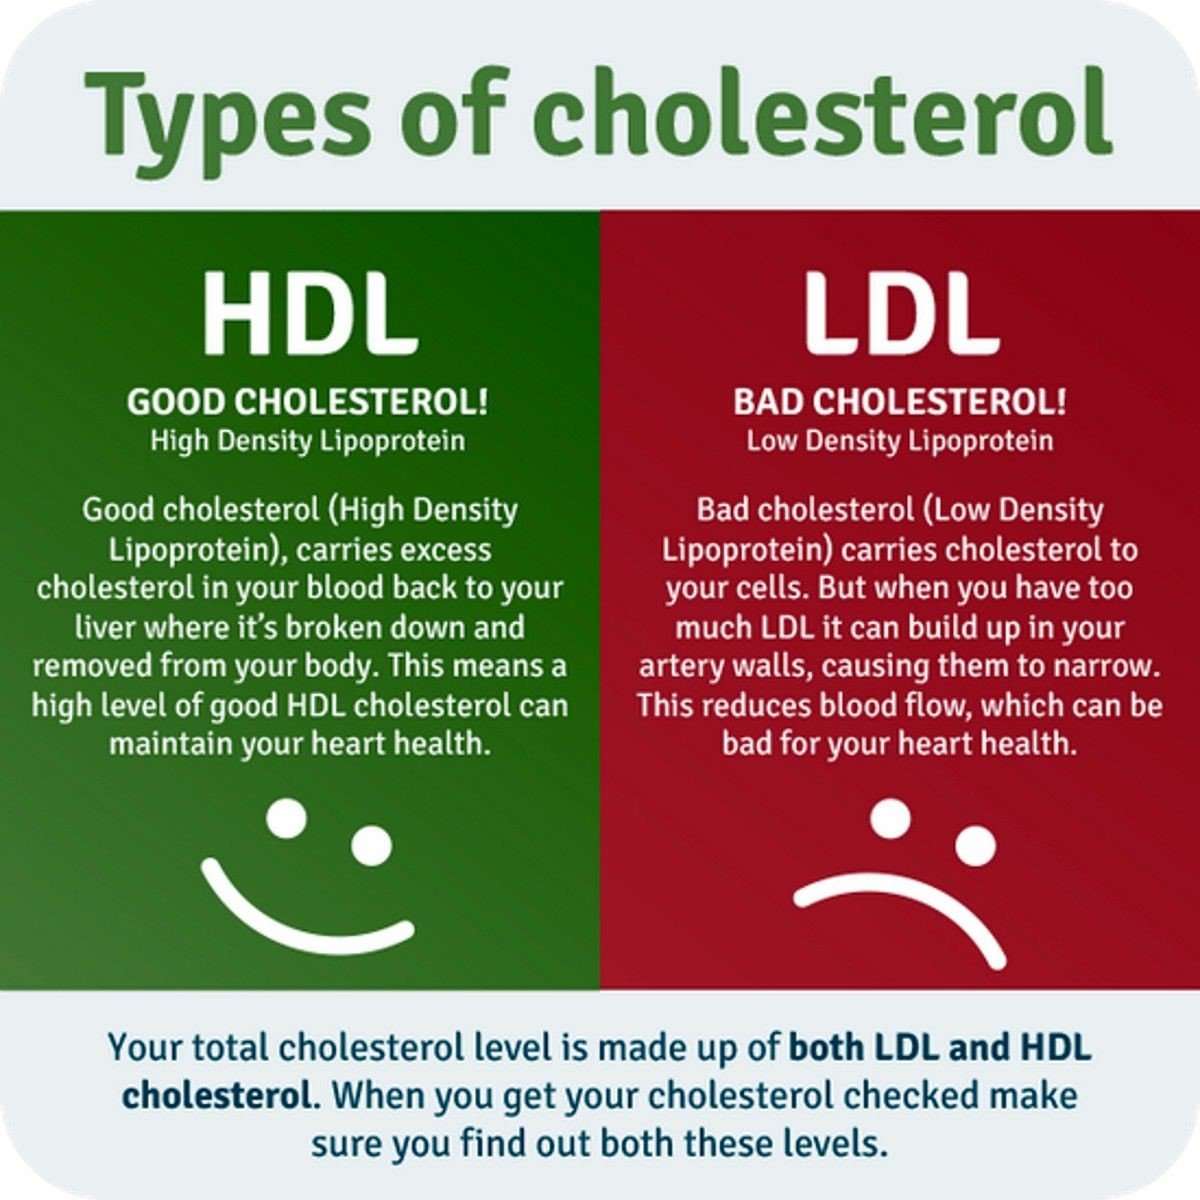 HEALTHY LIFE: New Cholesterol Guidelines Just Released